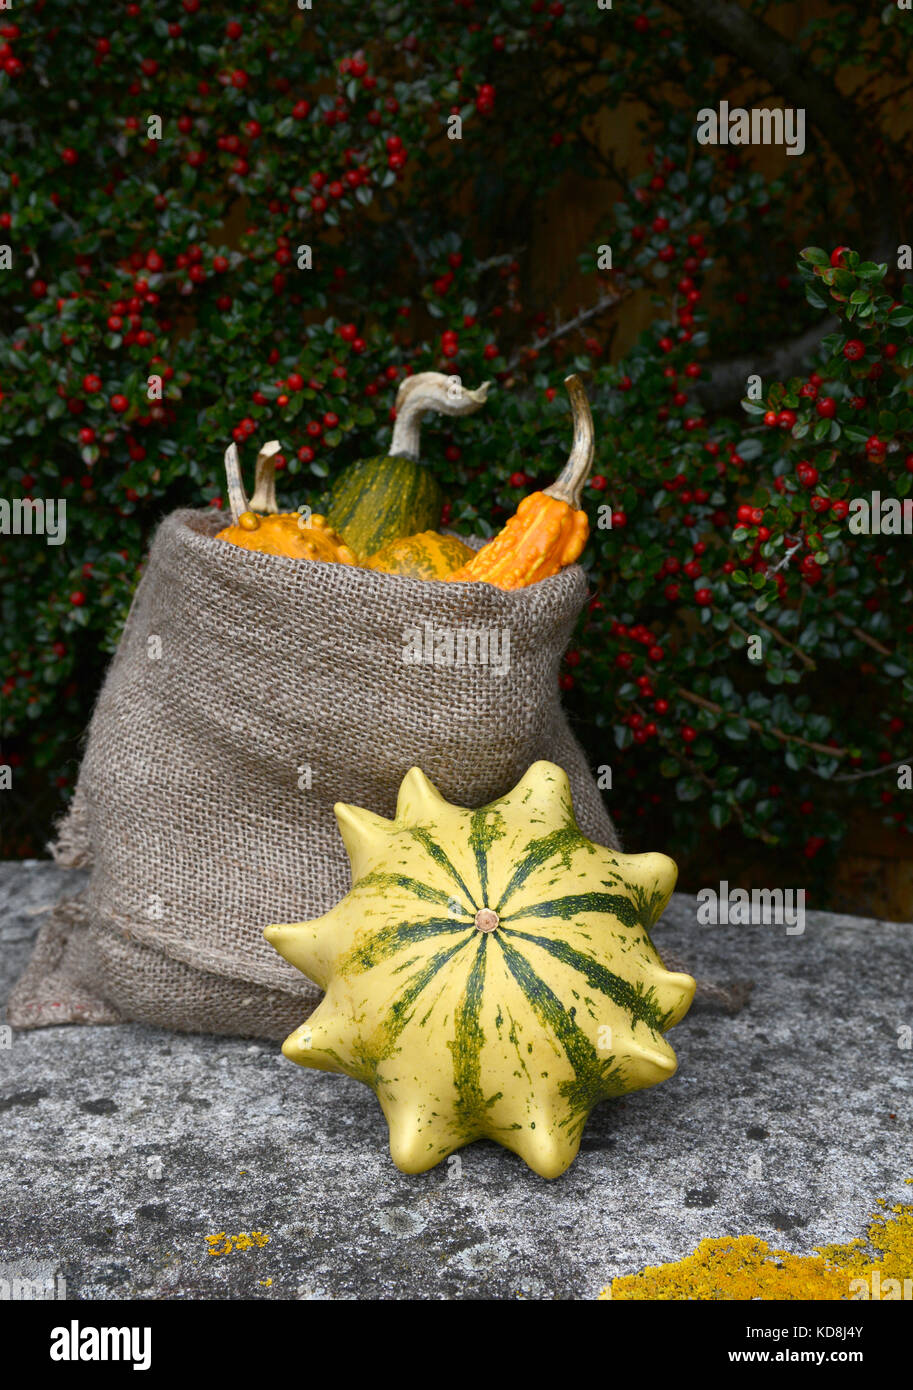 Striped Crown of Thorns gourd with full sack of ornamental squashes on a stone seat, against background of red cotoneaster berries Stock Photo